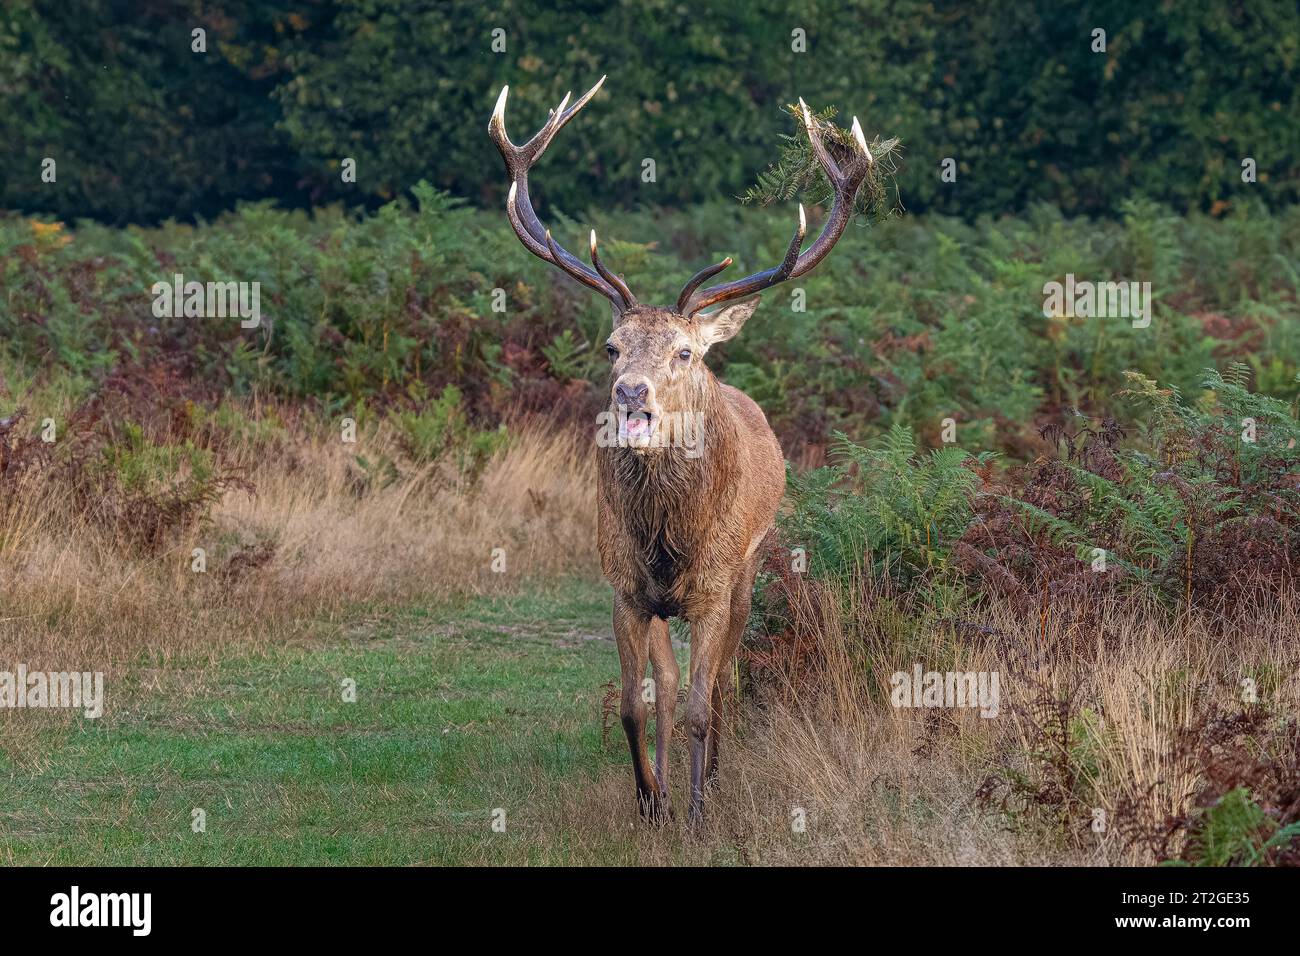 Red deer stag in Bushy Park Hampton hill London UK one early moring Stock Photo